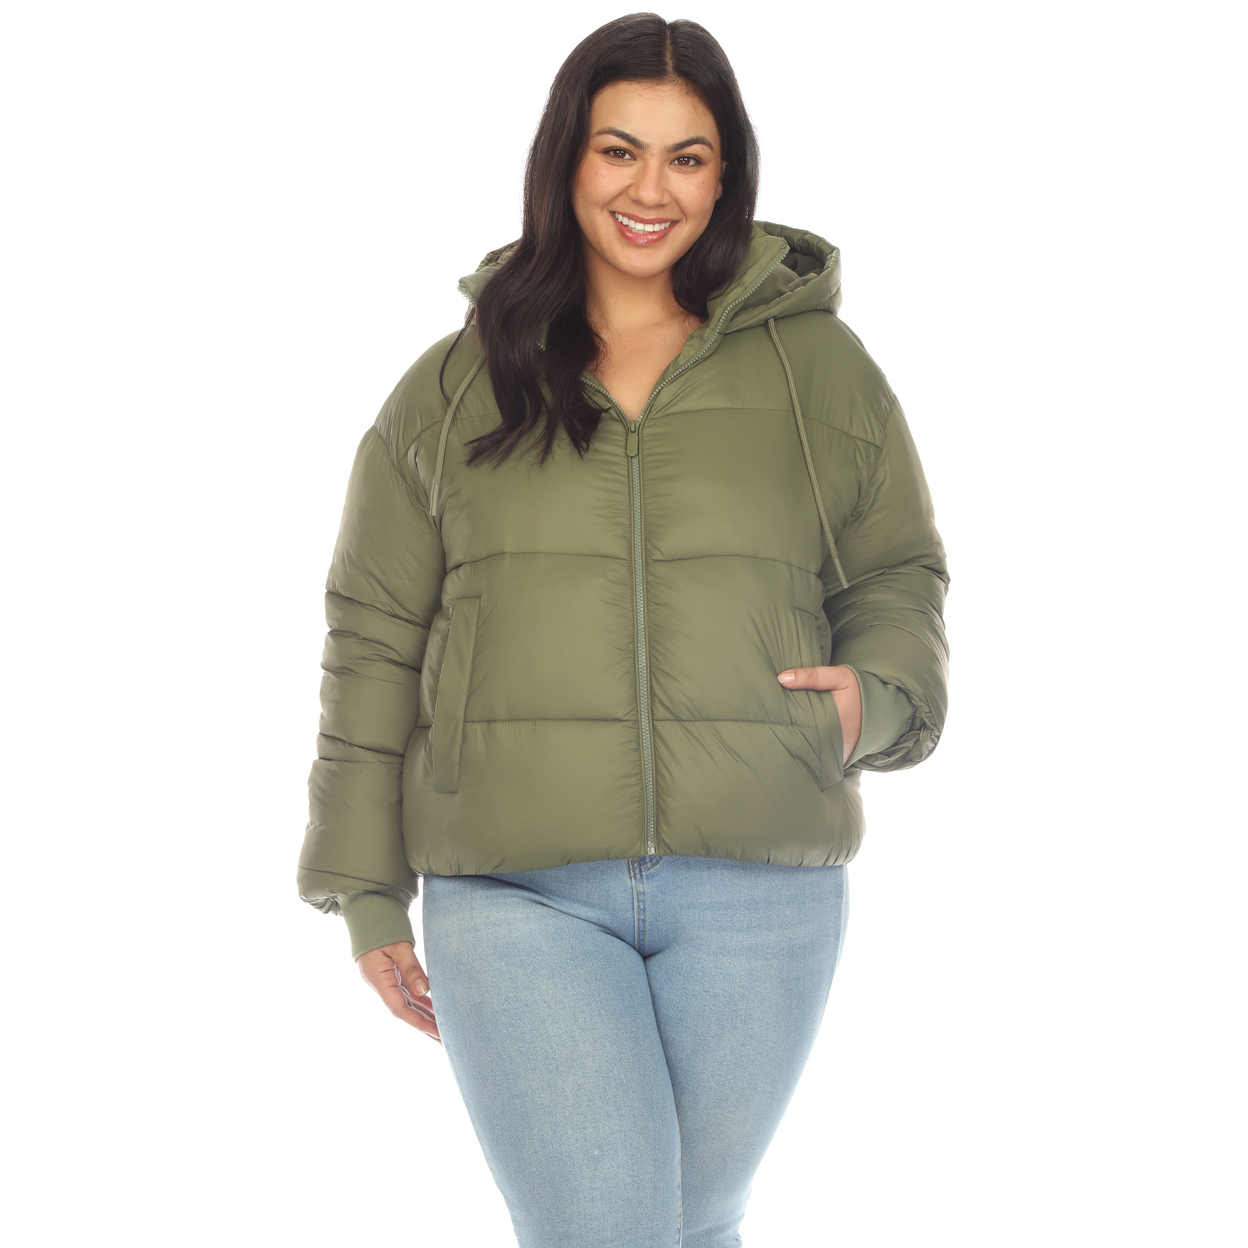 White Mark Women's Zip Hooded Puffer Jacket With Pockets - Olive, 2x